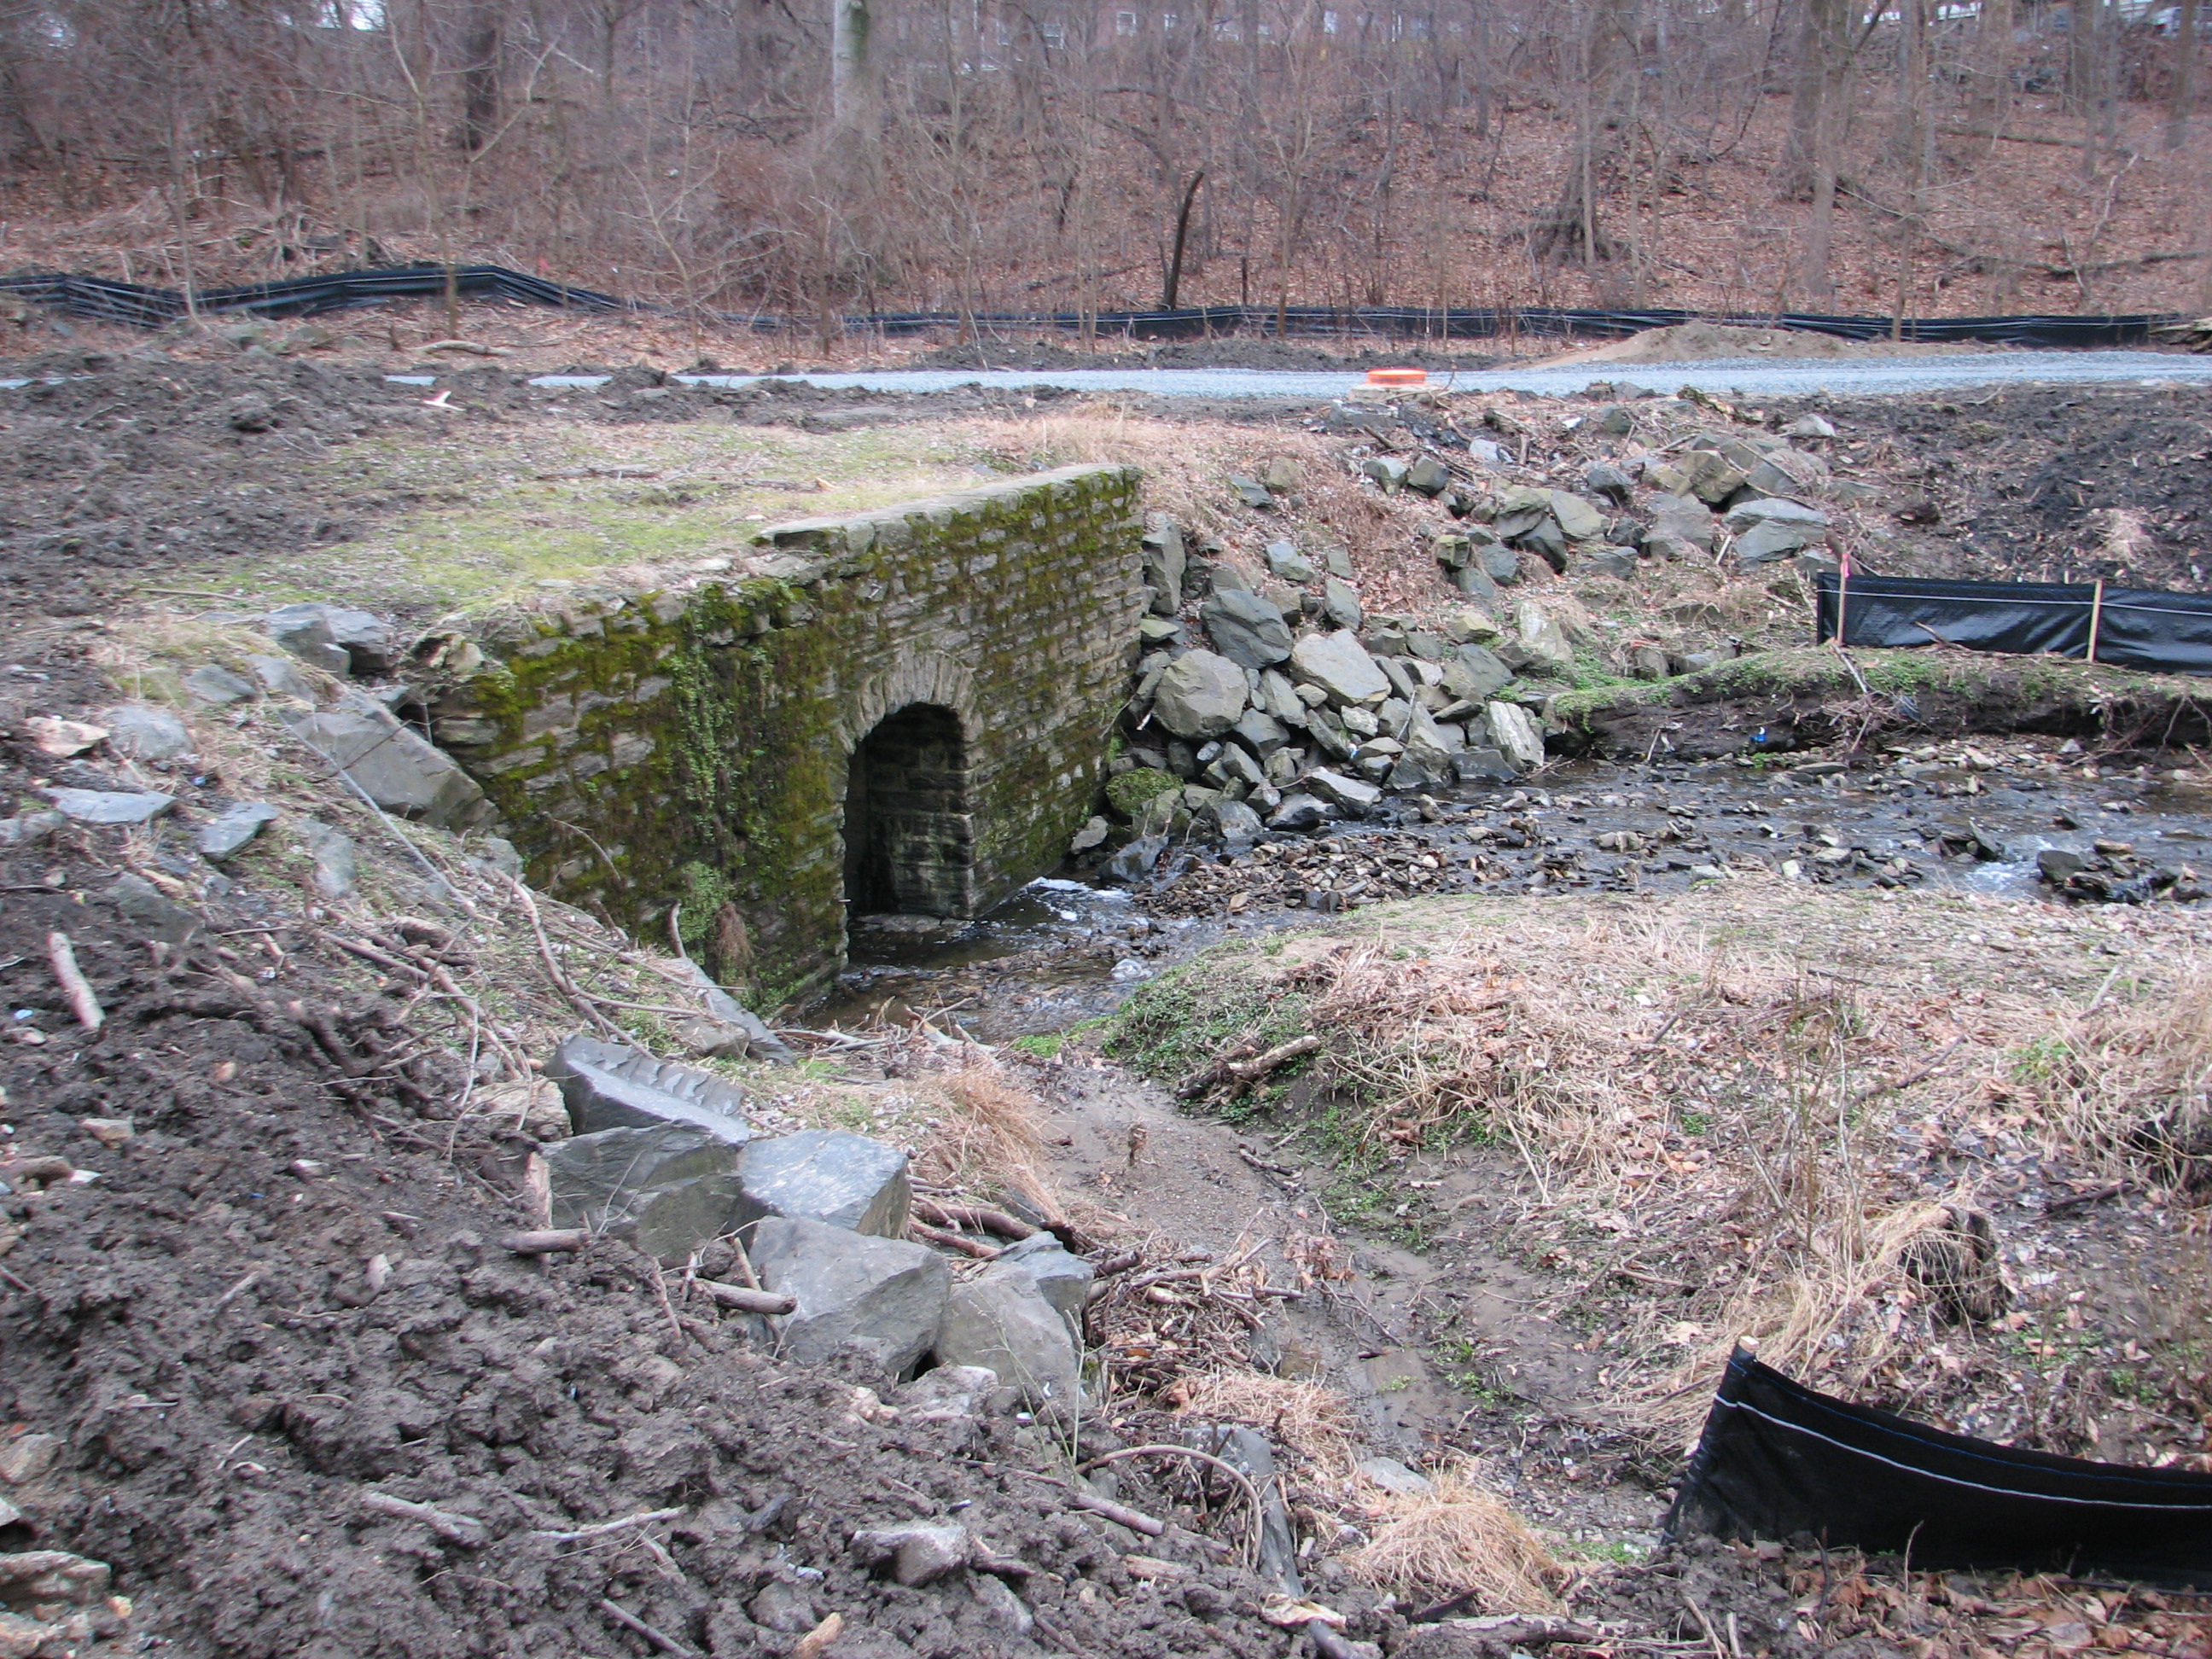 More than 100 years ago, a portion of the West Branch of Indian Creek was put into this culvert. The creek is now being daylighted - moved above ground - and the culvert will be used to store overflow of  combined sanitary and storm sewers, which will help keep untreated sewage out of the creek